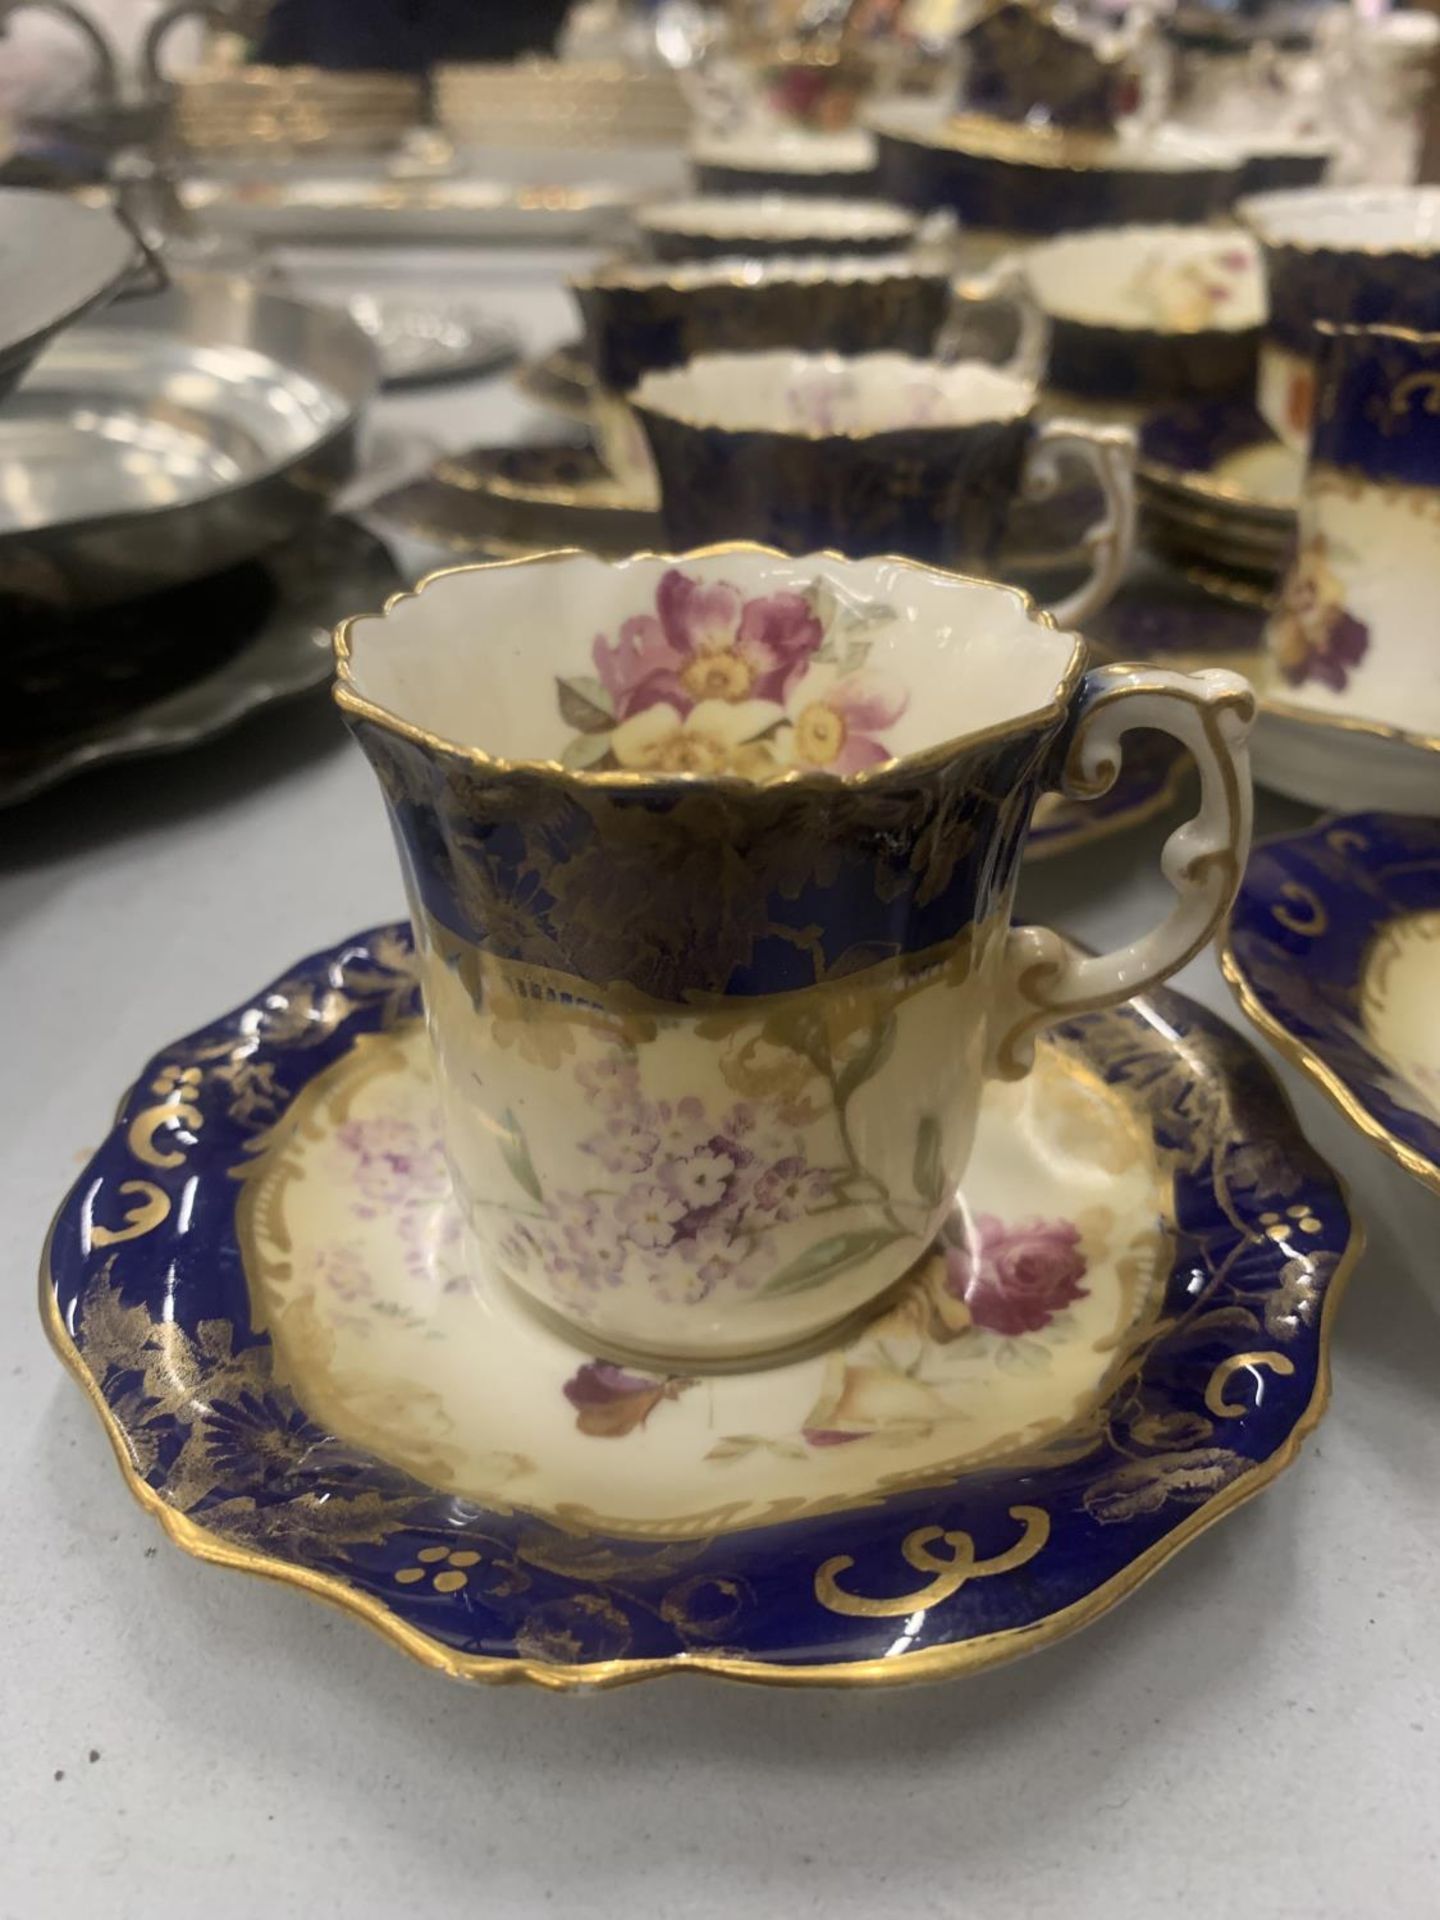 AN ANTIQUE CHINA TEASET TO INCLUDE A SUGAR BOWL, CREAM JUG, CUPS, SAUCERS, AND SIDE PLATES - Image 2 of 5